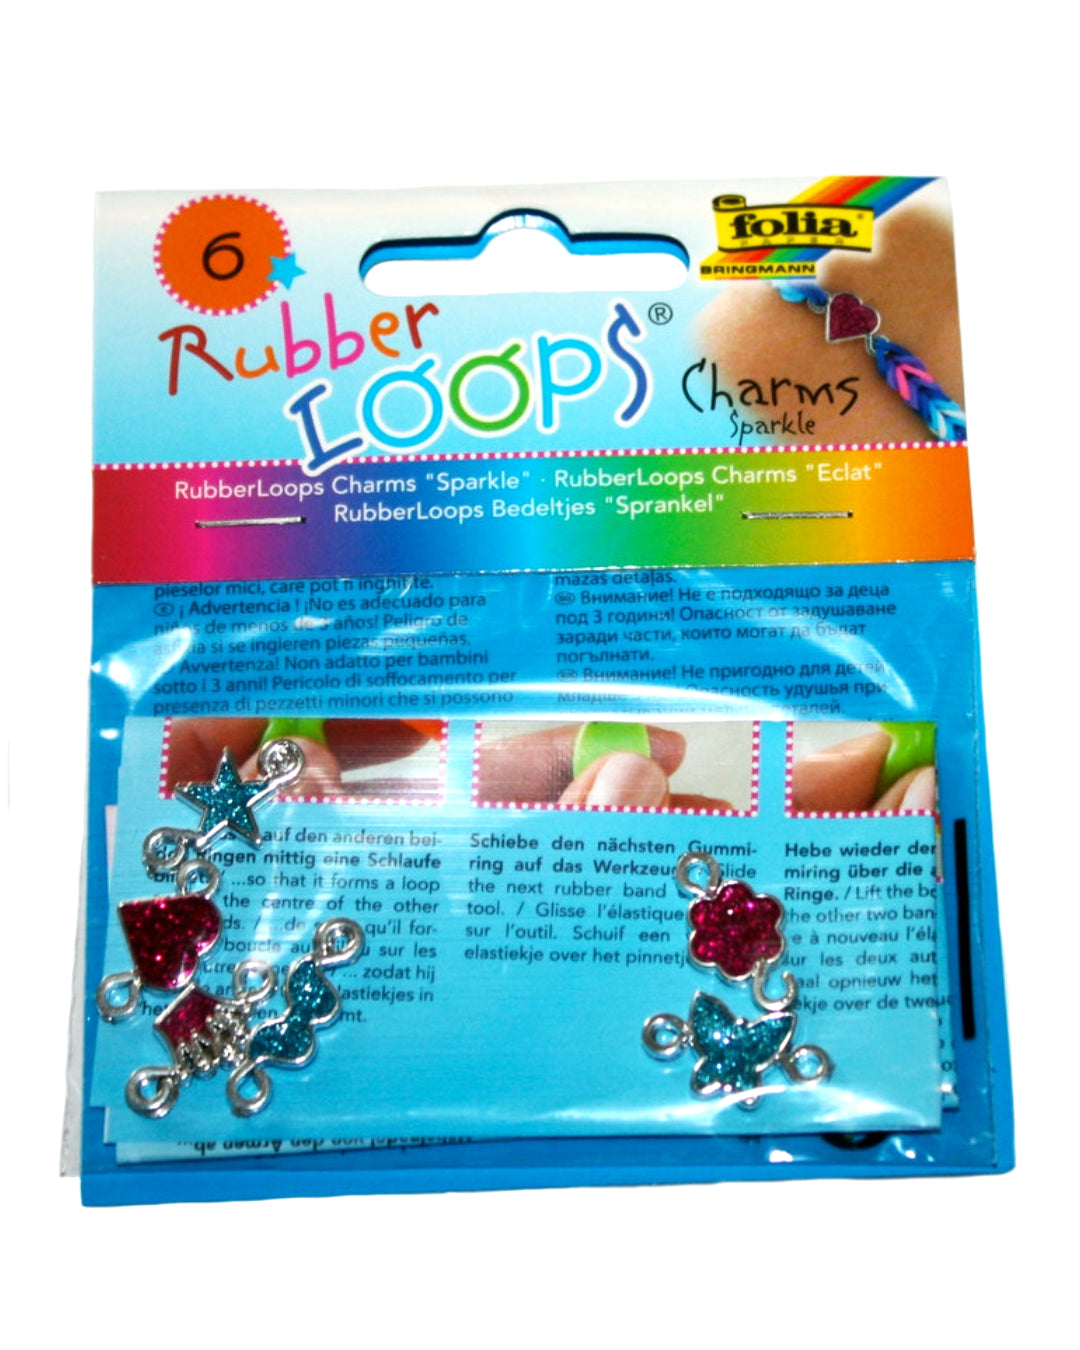 Rubber Loops Charms SPARKLE